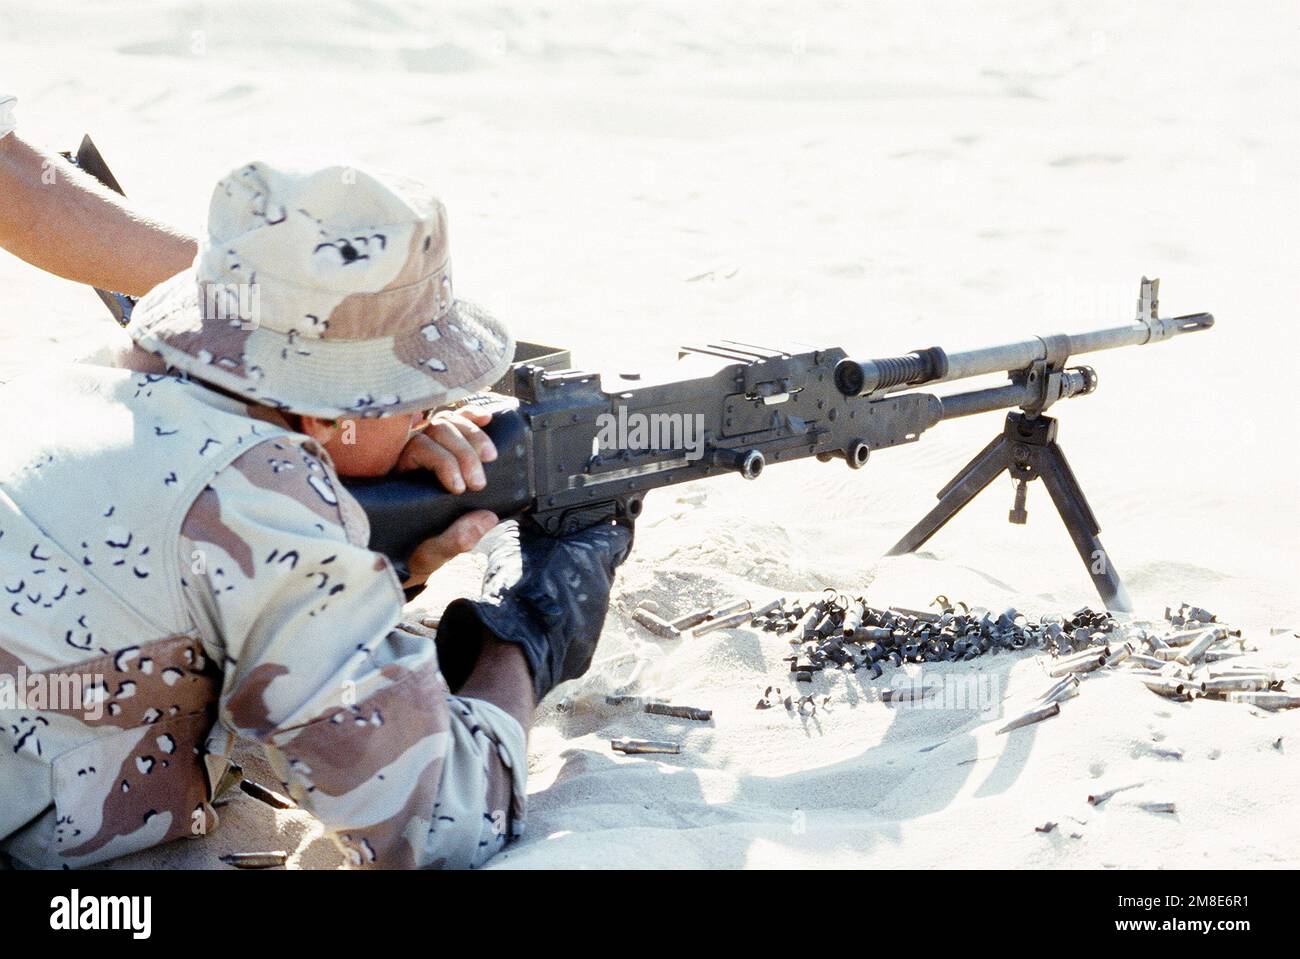 A Marine from 7th Platoon, 1ST Force Reconnaissance Company, fires a British L7A2 general purpose machine gun during weapons training with British soldiers of the Queen's Dragoon Guards at Abu Hydra Range during Operation Desert Shield. Subject Operation/Series: DESERT SHIELD Country: Saudi Arabia (SAU) Stock Photo